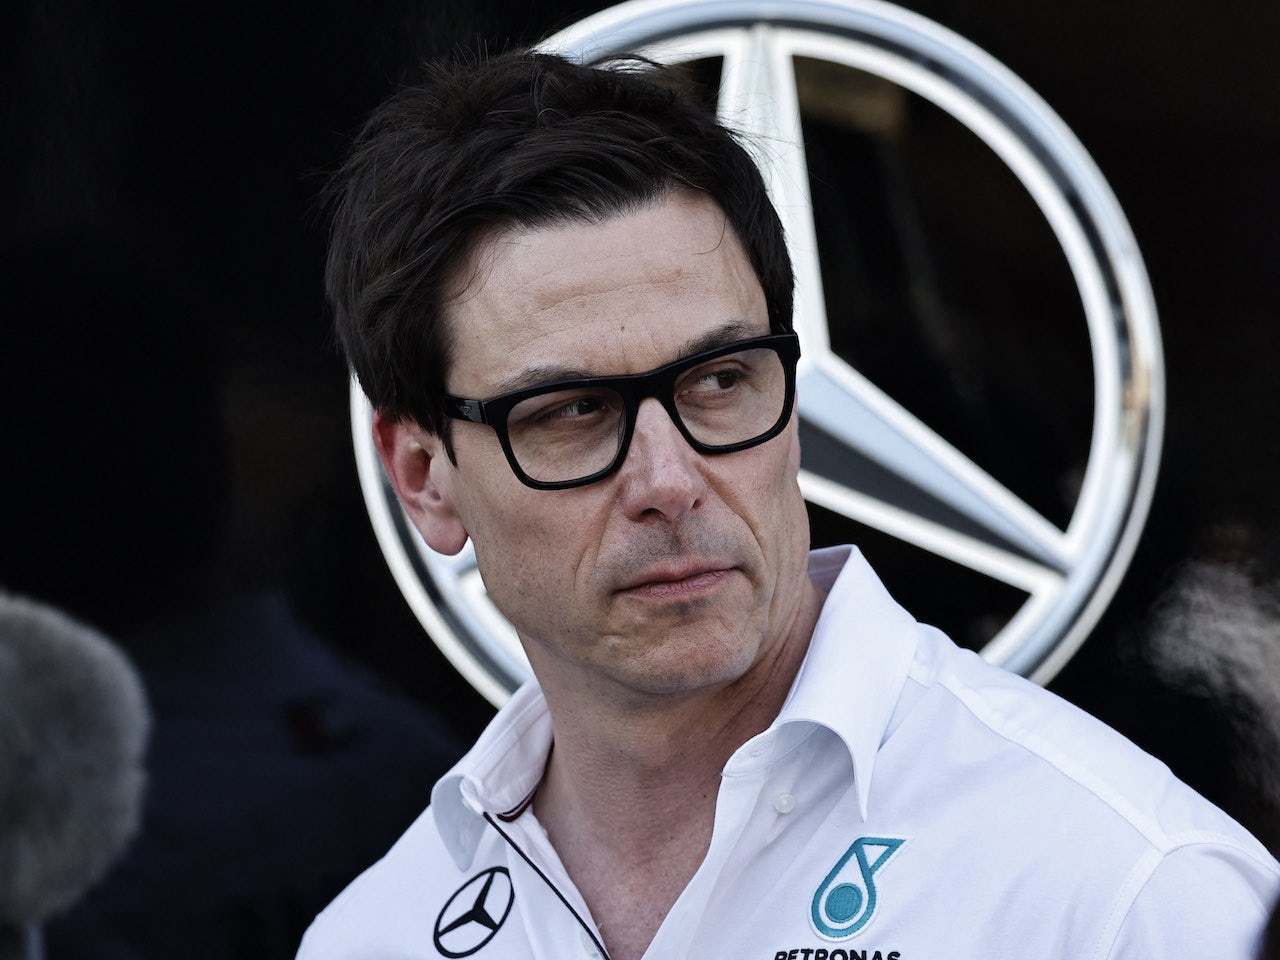 F1's newest billionaire is Toto Wolff